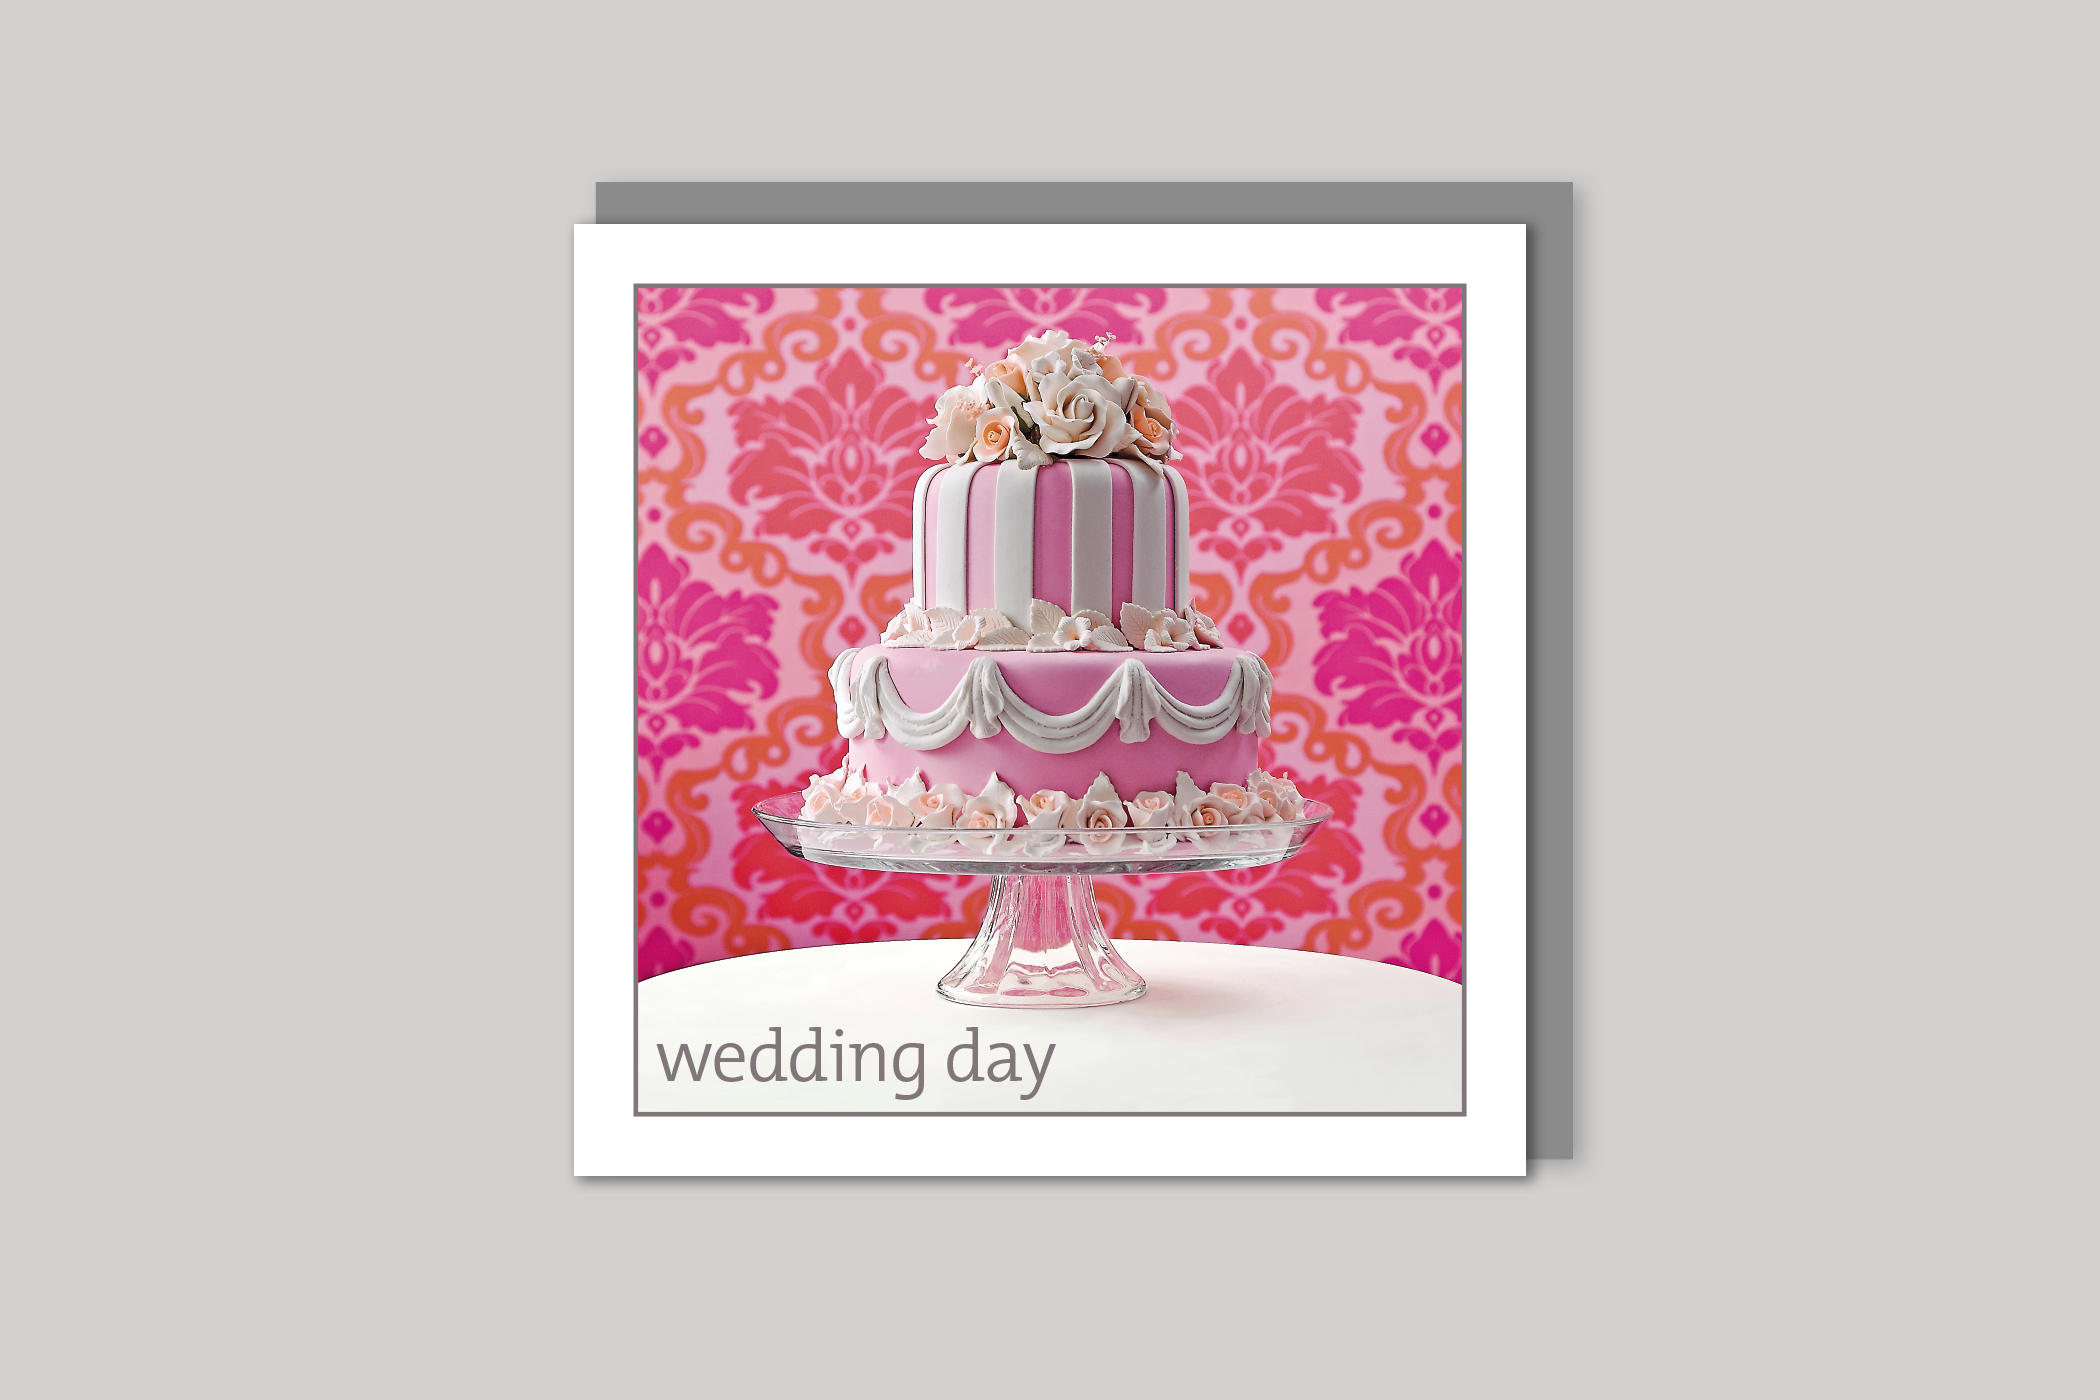 The Wedding Cake wedding card from Exposure Silver Edition range of greeting cards by Icon, back page.